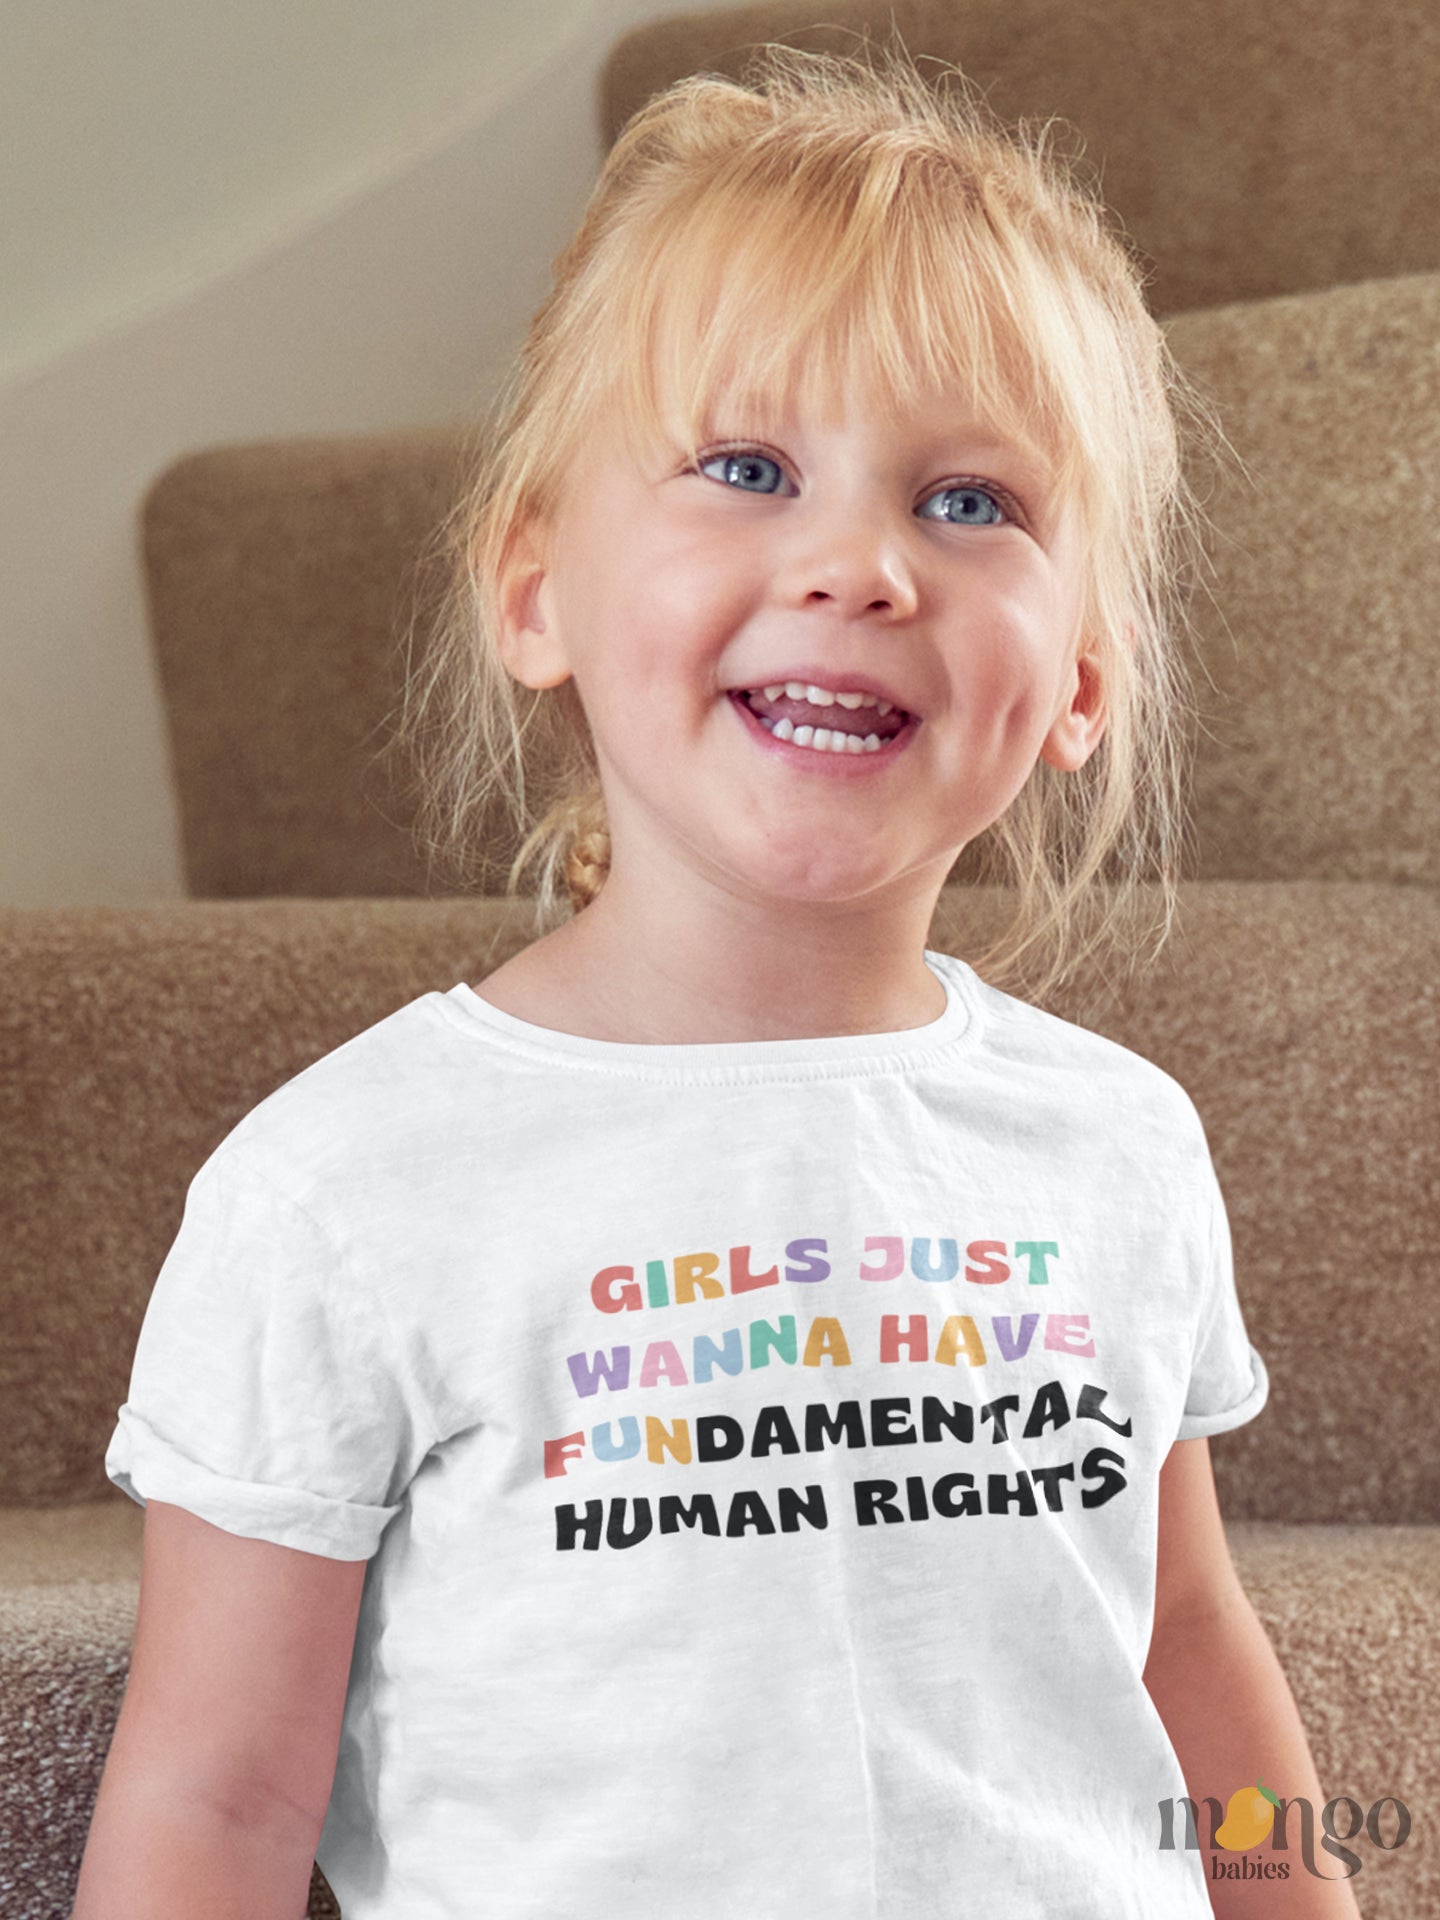 Kid's t-shirt featuring a fun printed graphic and the empowering text 'Girls Just Wanna Have Fundamental Human Rights.' Explore this inspiring tee that encourages equality and empowerment.